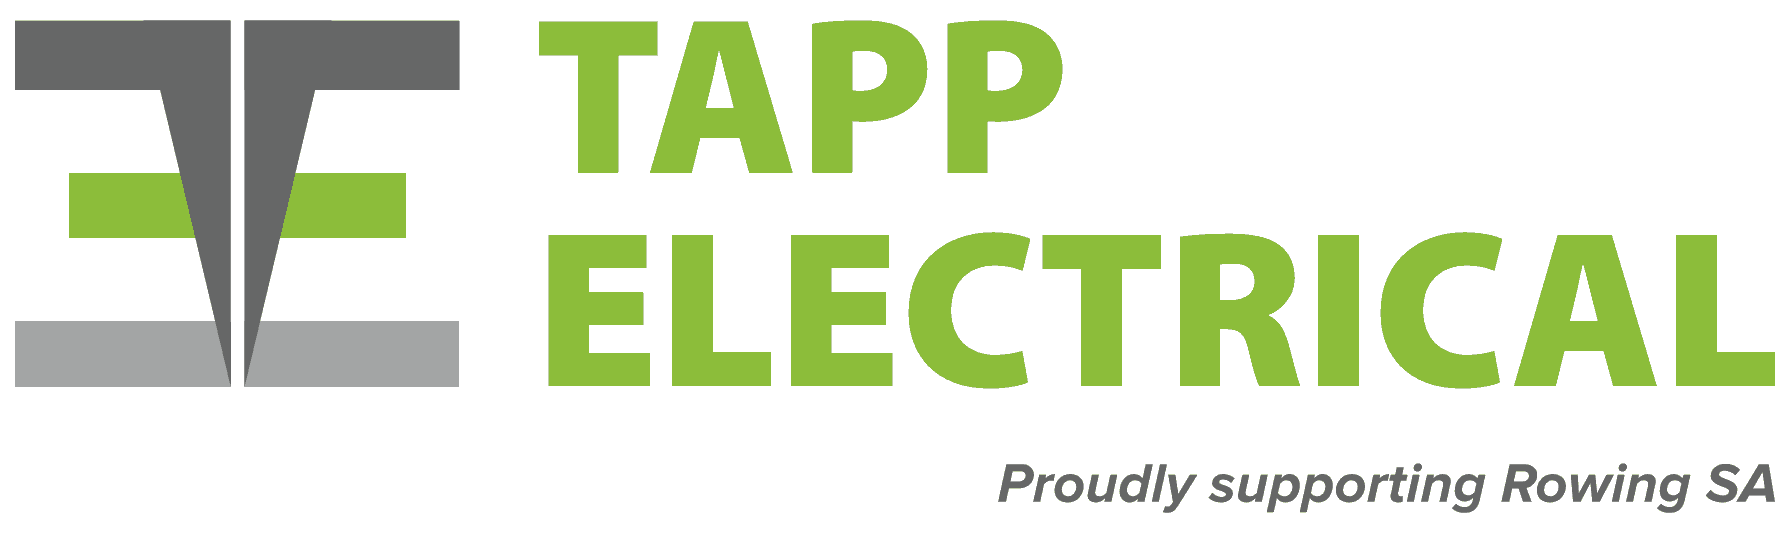 Tapp Electrical - Rowing SA Key Corporate Partner